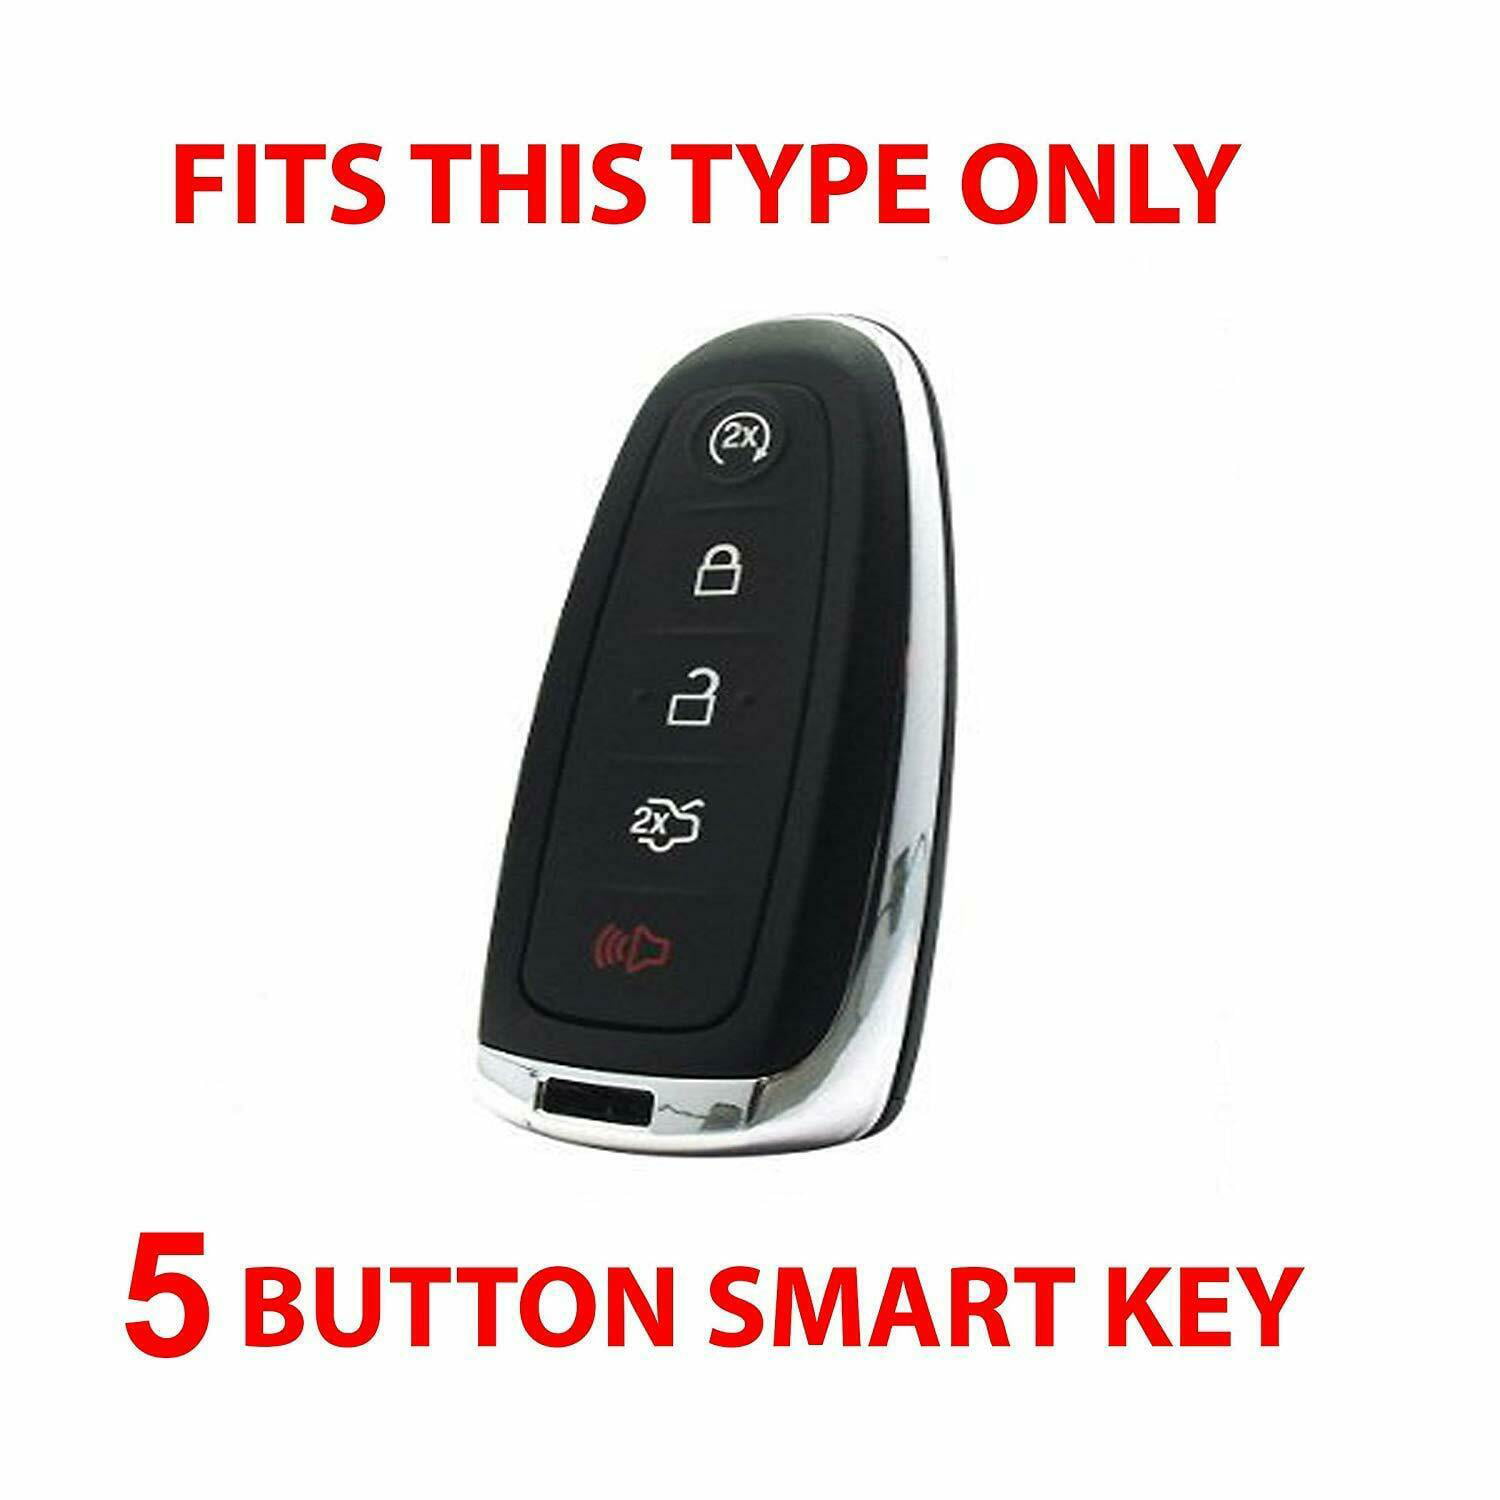 NEW Ford 2011-2018 5 Button Smart Key M3N5WY8609 BT4T Top Quality USA Seller 